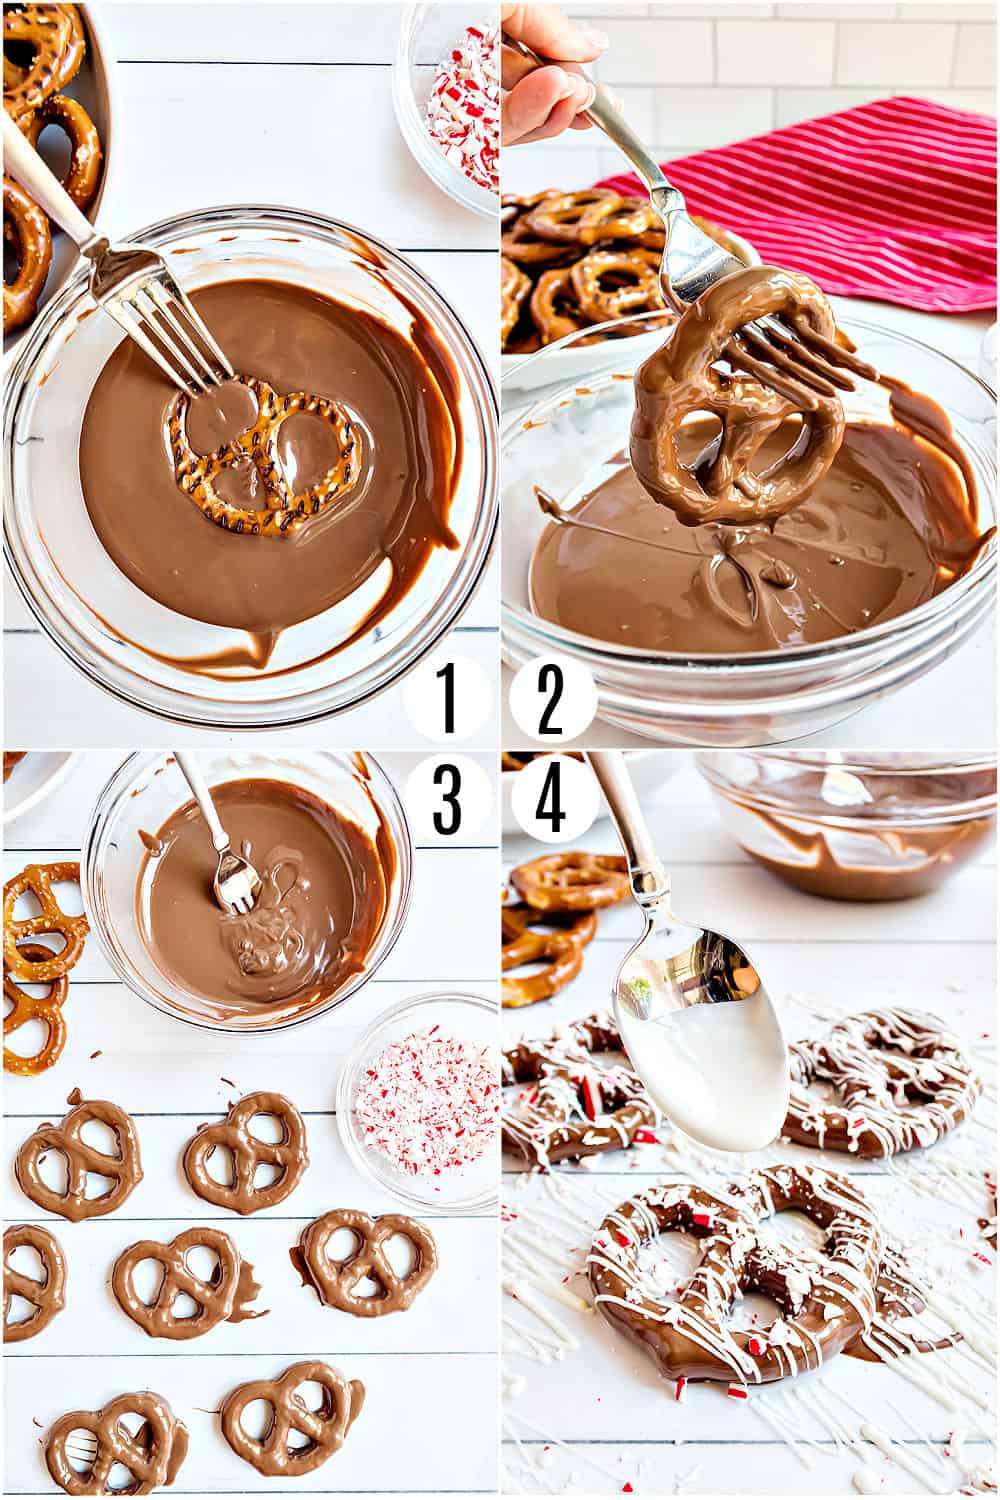 Step by step photos showing how to make chocolate covered peppermint pretzels.